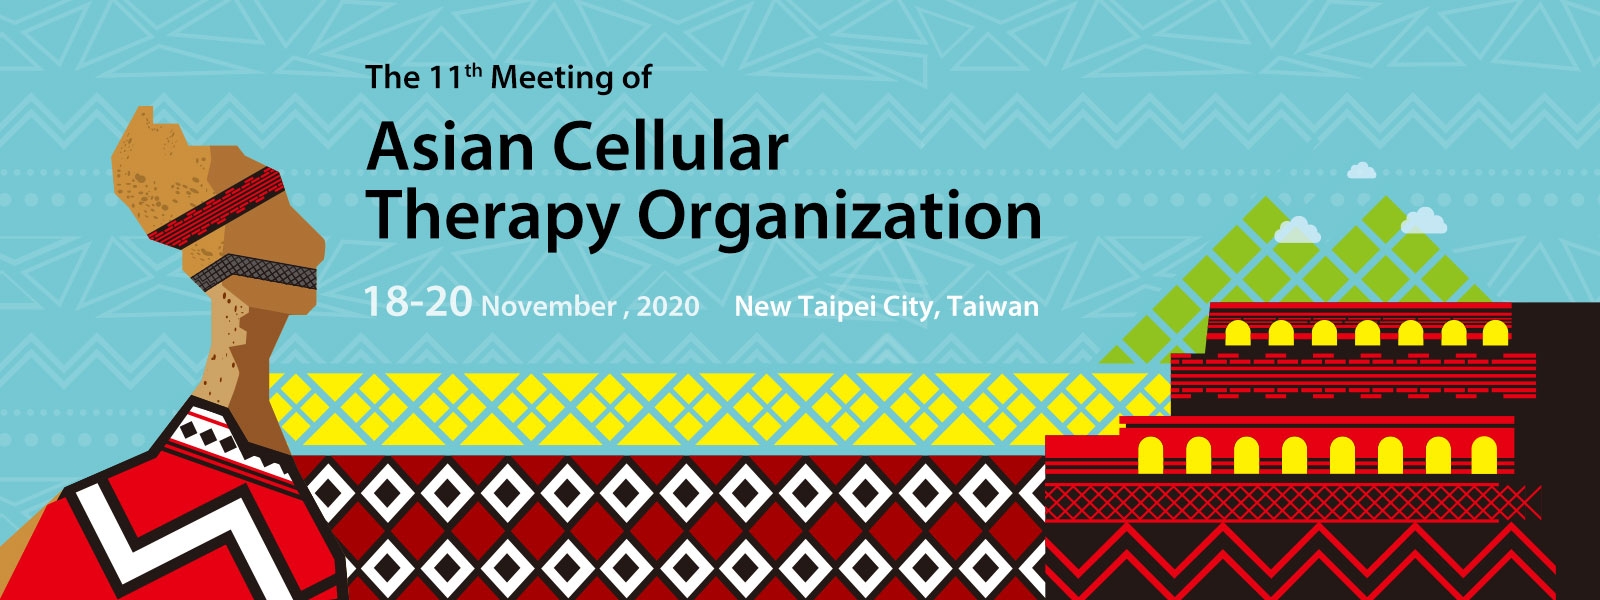 2020.08.12 l The 11th Meeting of Asian Cellular Therapy Organization (2020 ACTO)